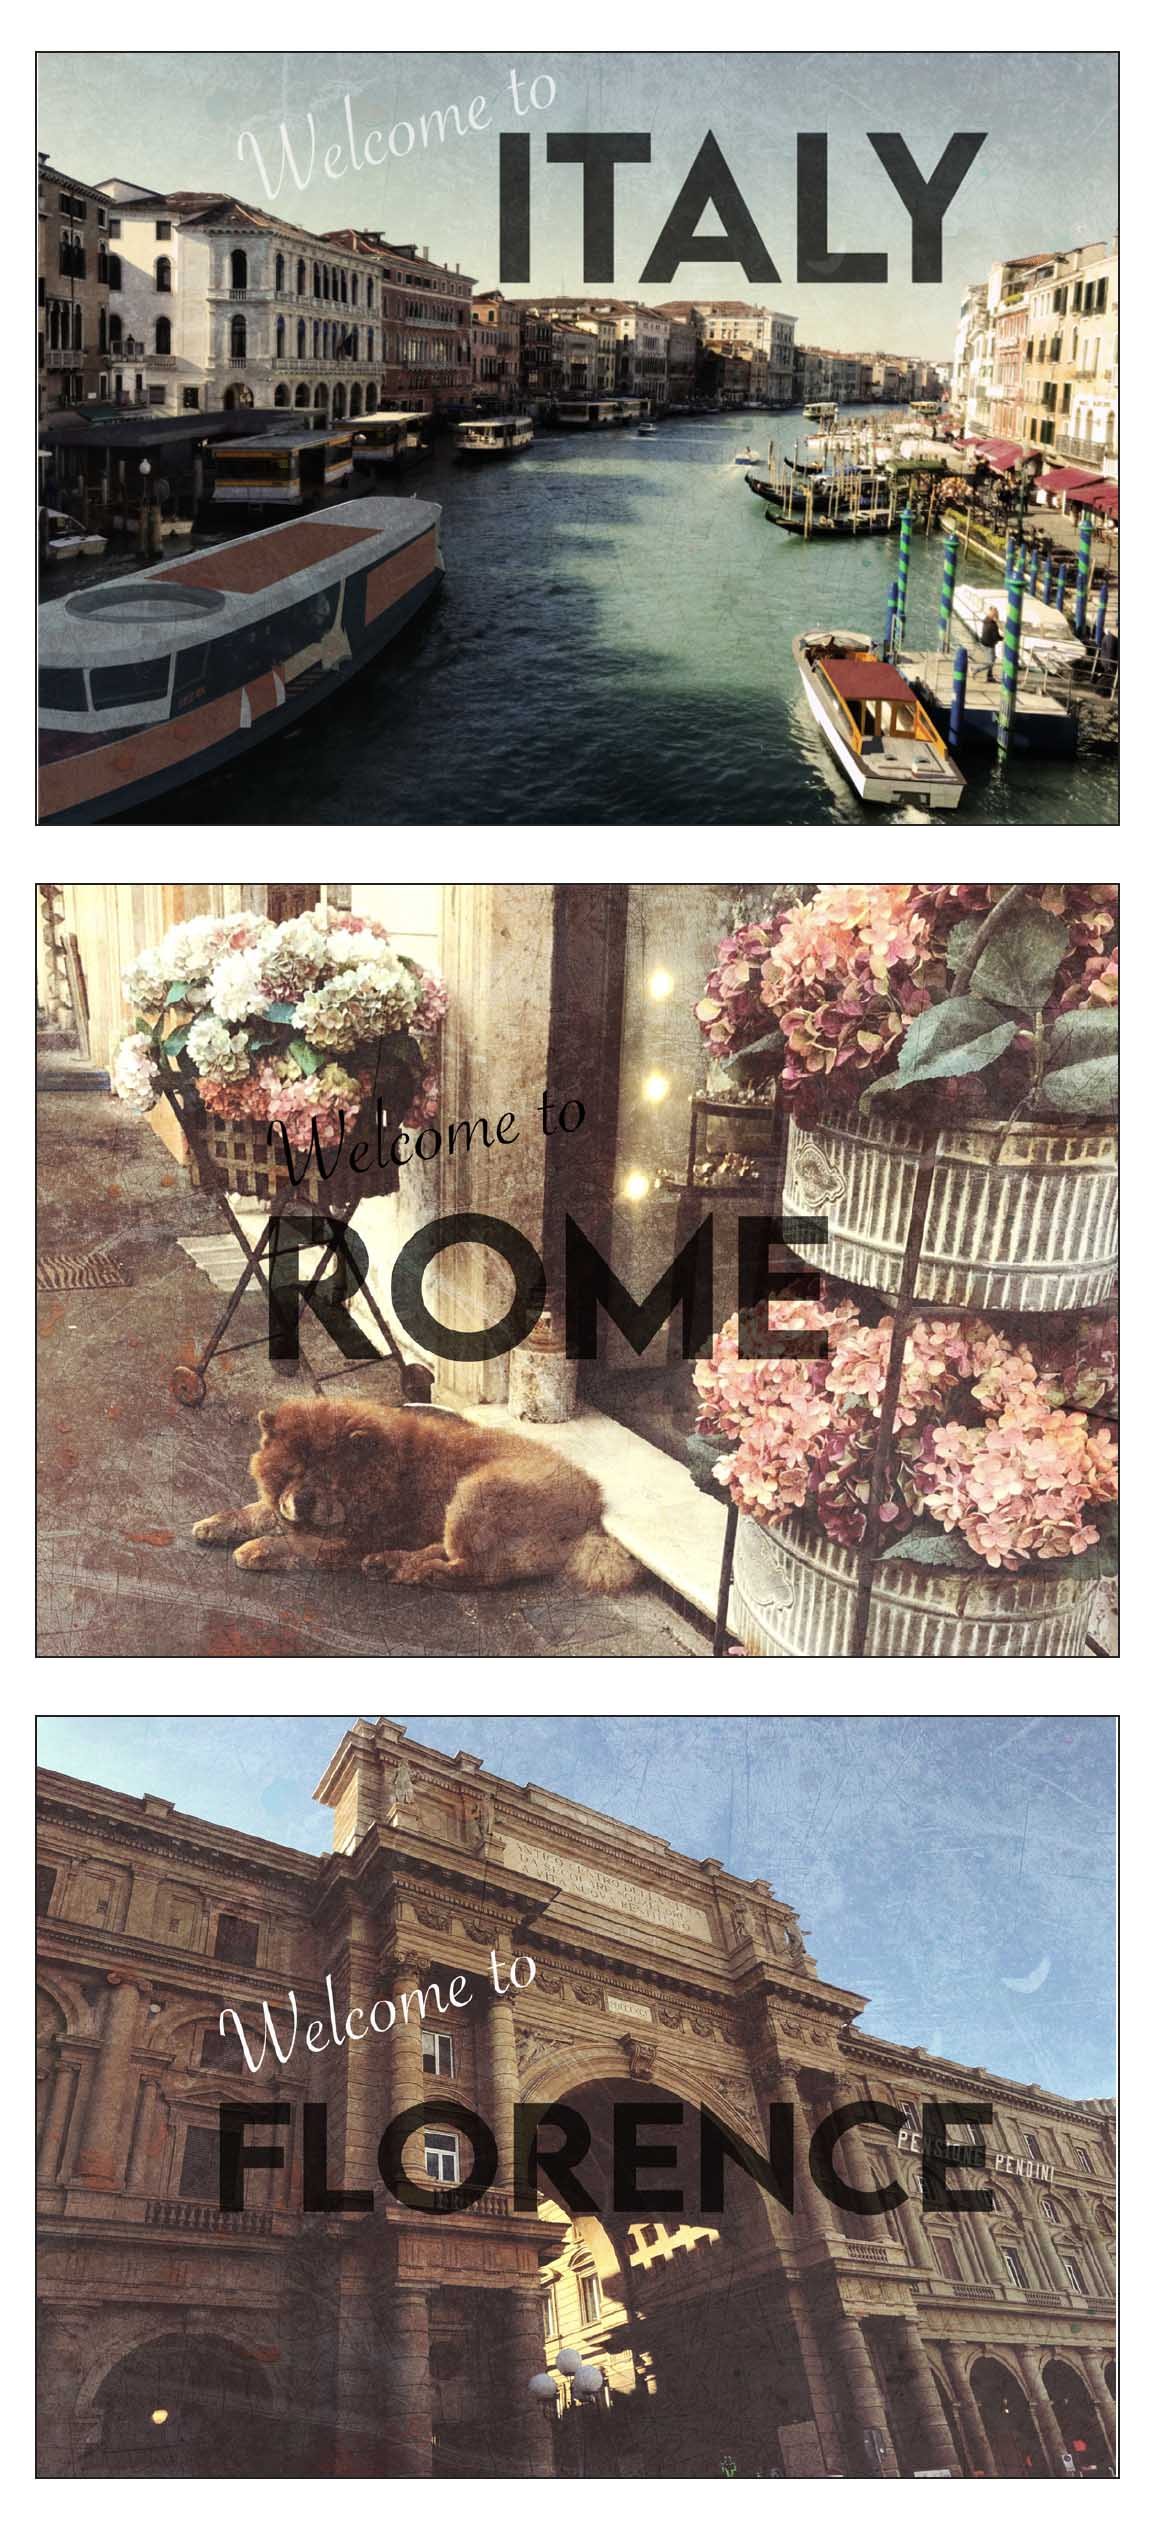 Postcard series showing scenes from Italy including canals in Venice, quiet street in Rome, and the Uffizi in Florence